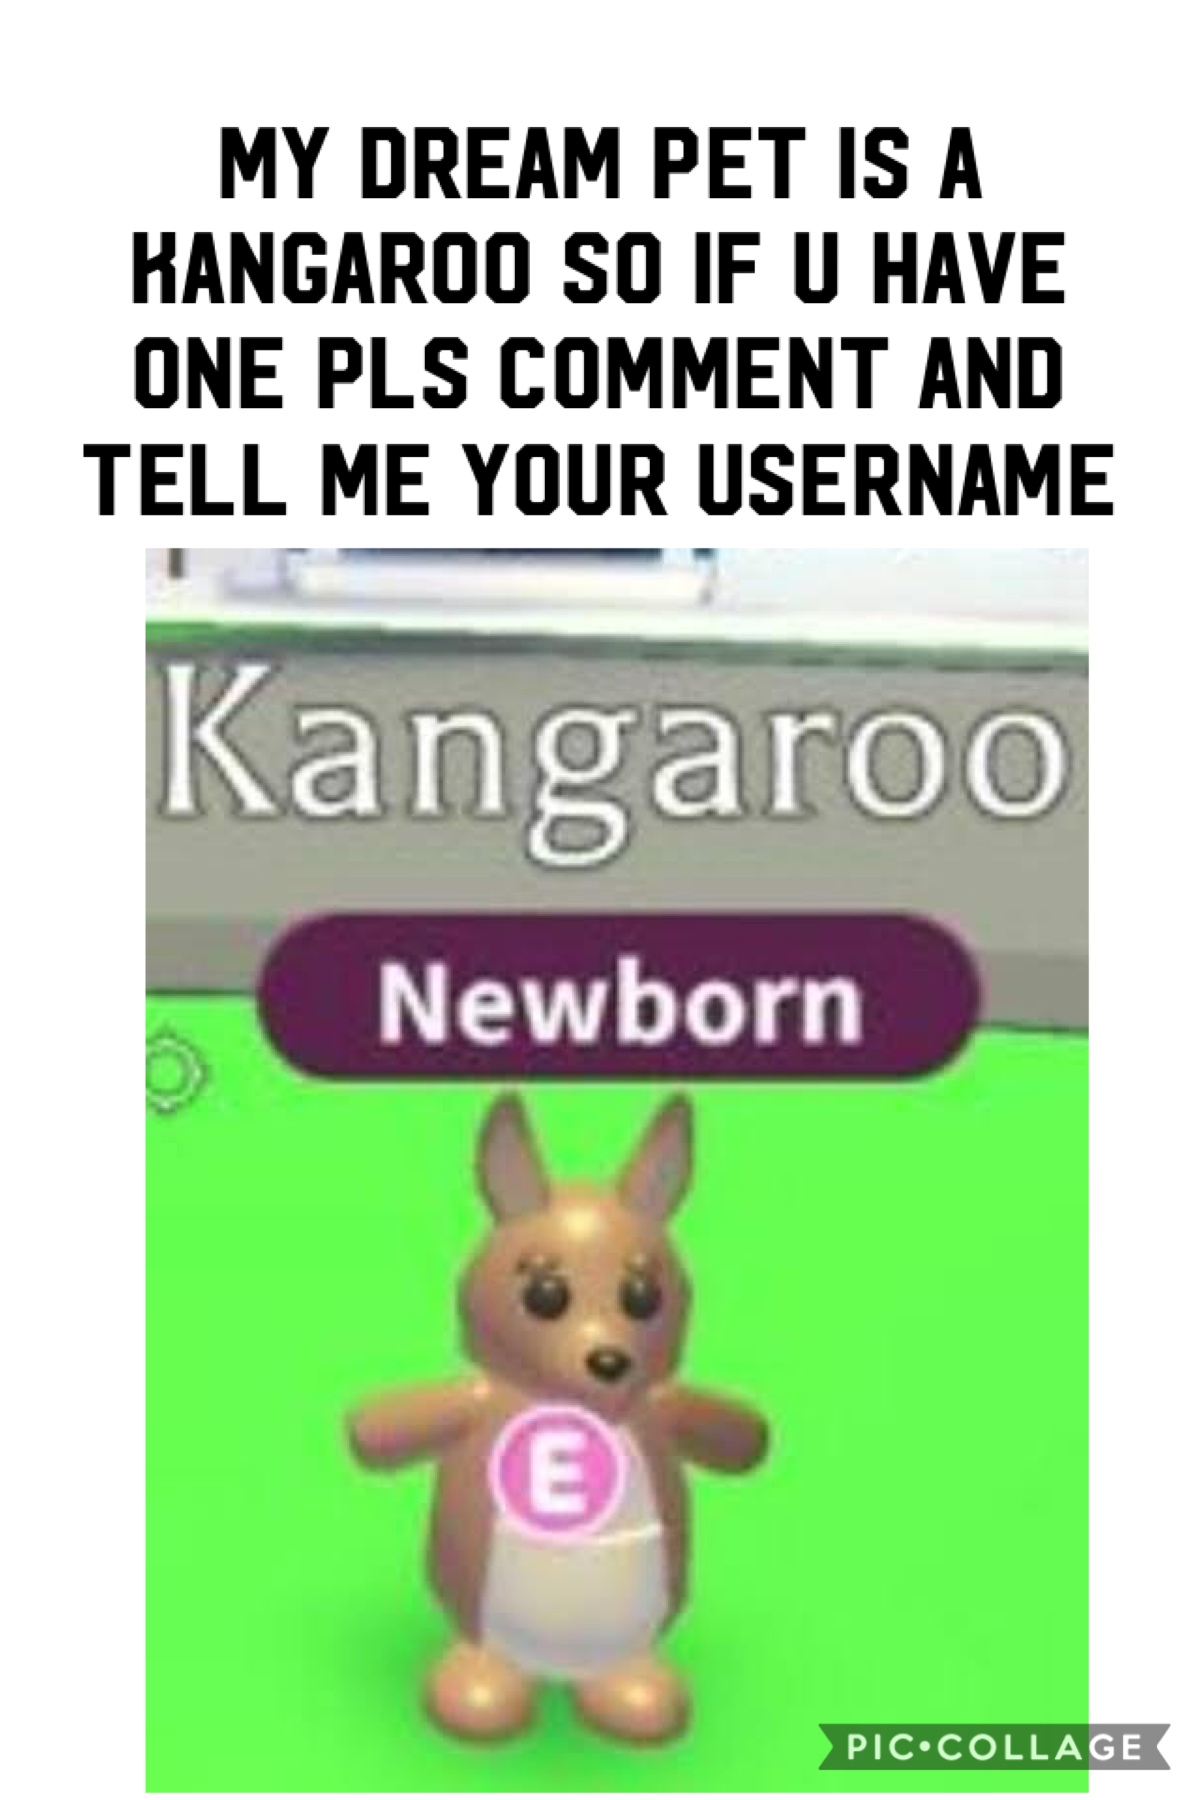 Please send me your username if you have a kangaroo